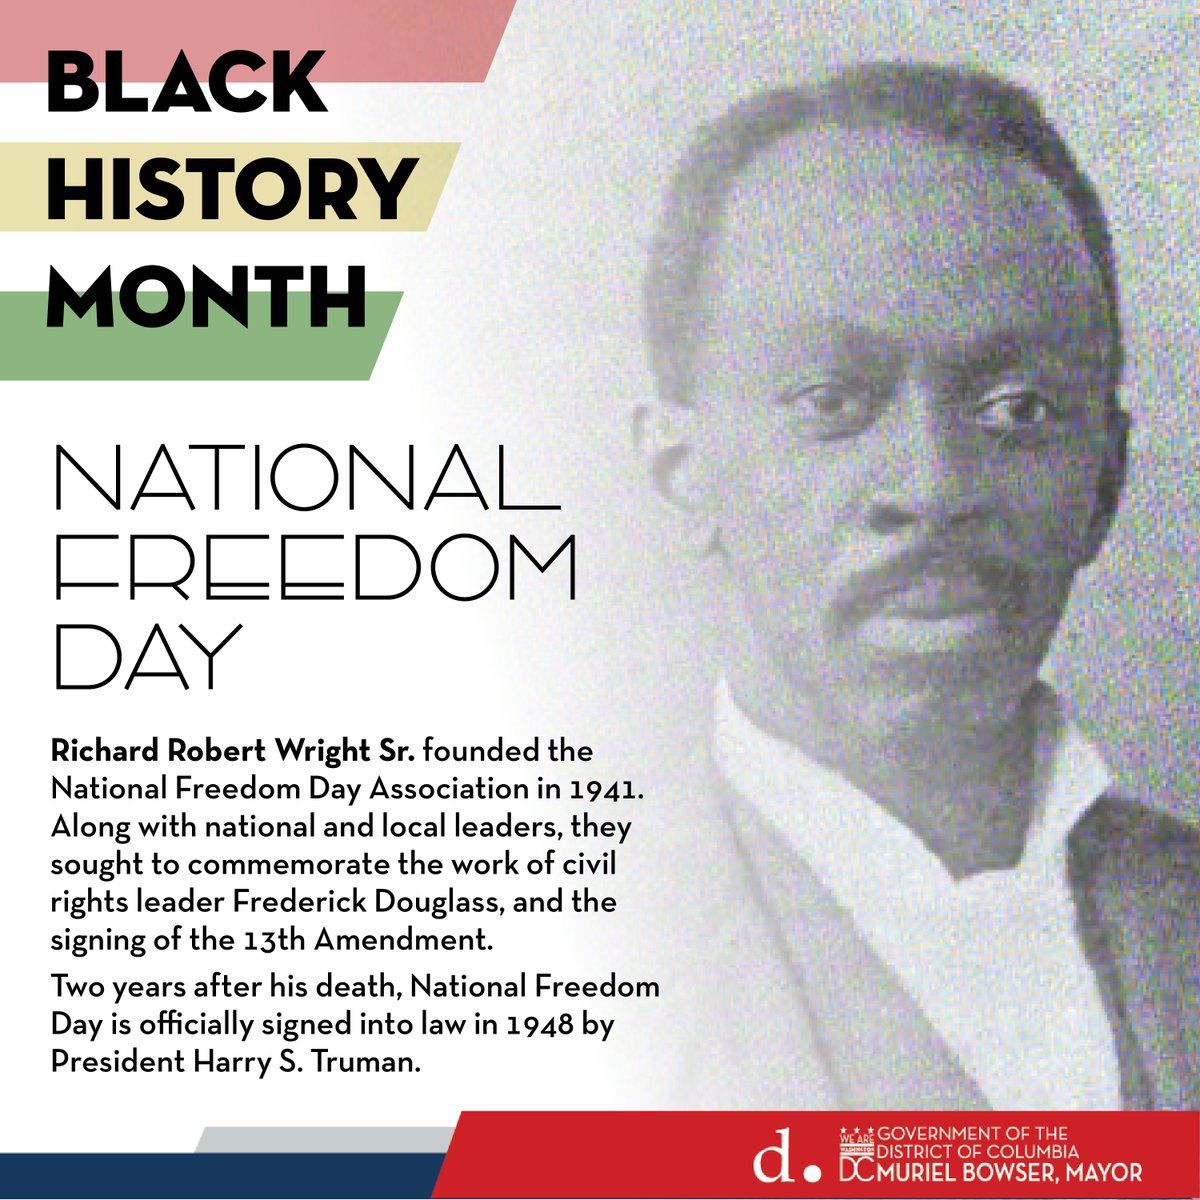 We're celebrating #BlackHistoryMonth & #NationalFreedomDay. Marking President Lincoln’s signing of the 13th Amendment to the Constitution in 1865. We recognize Richard R. Wright Sr. for his work in building upon the framework of Frederick Douglass on citizenship & voting rights. https://t.co/3biD7y4bEw